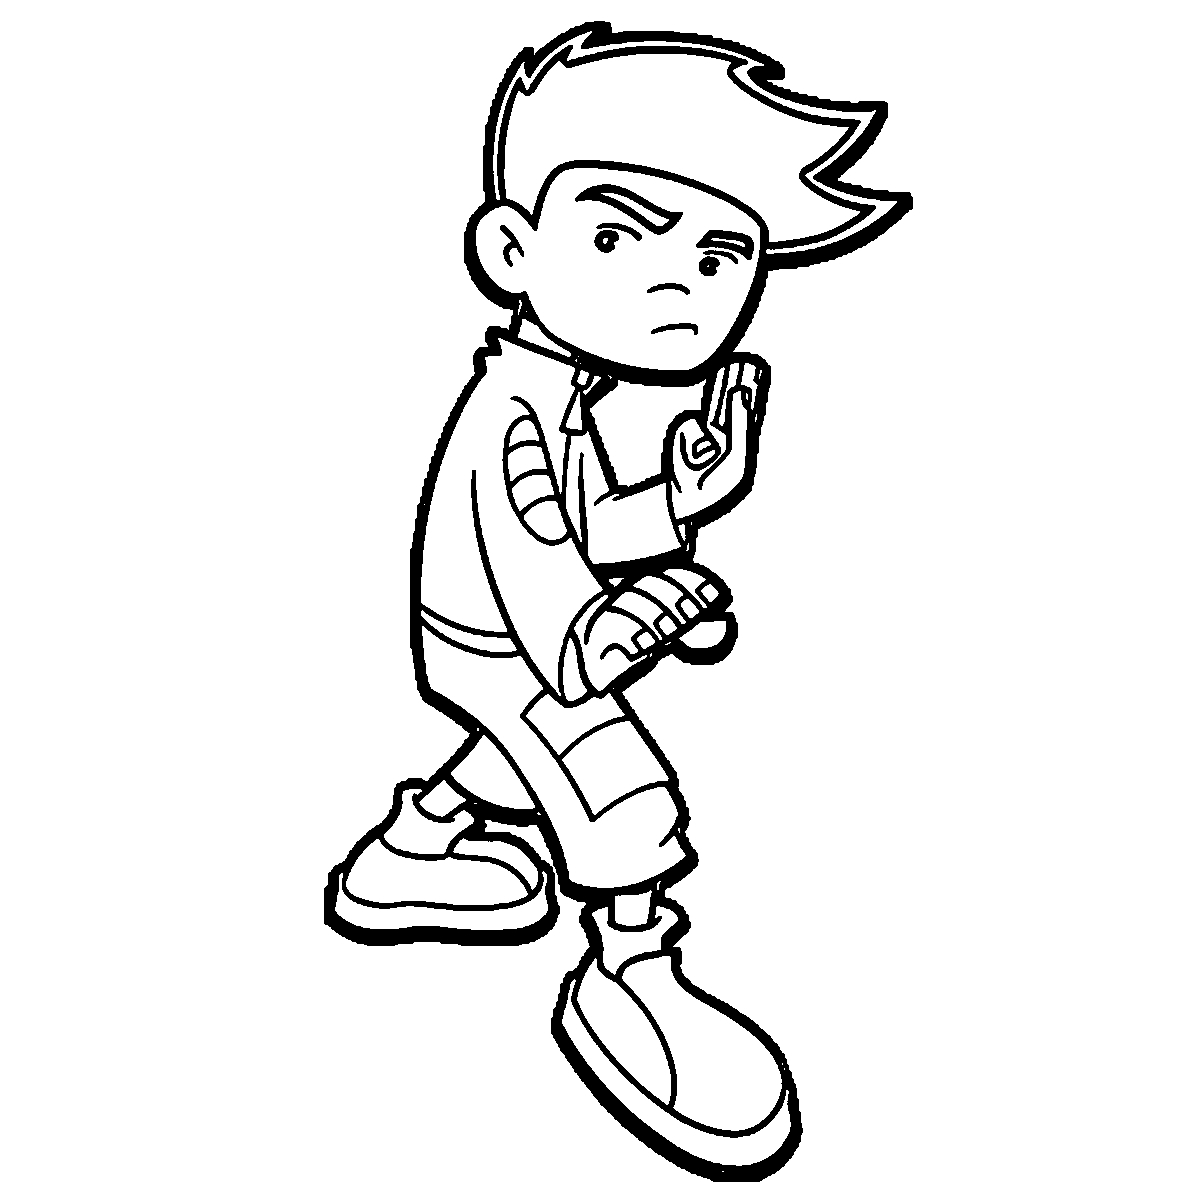 Barnabas Coloring Page Coloring Pages Of Jake Paul